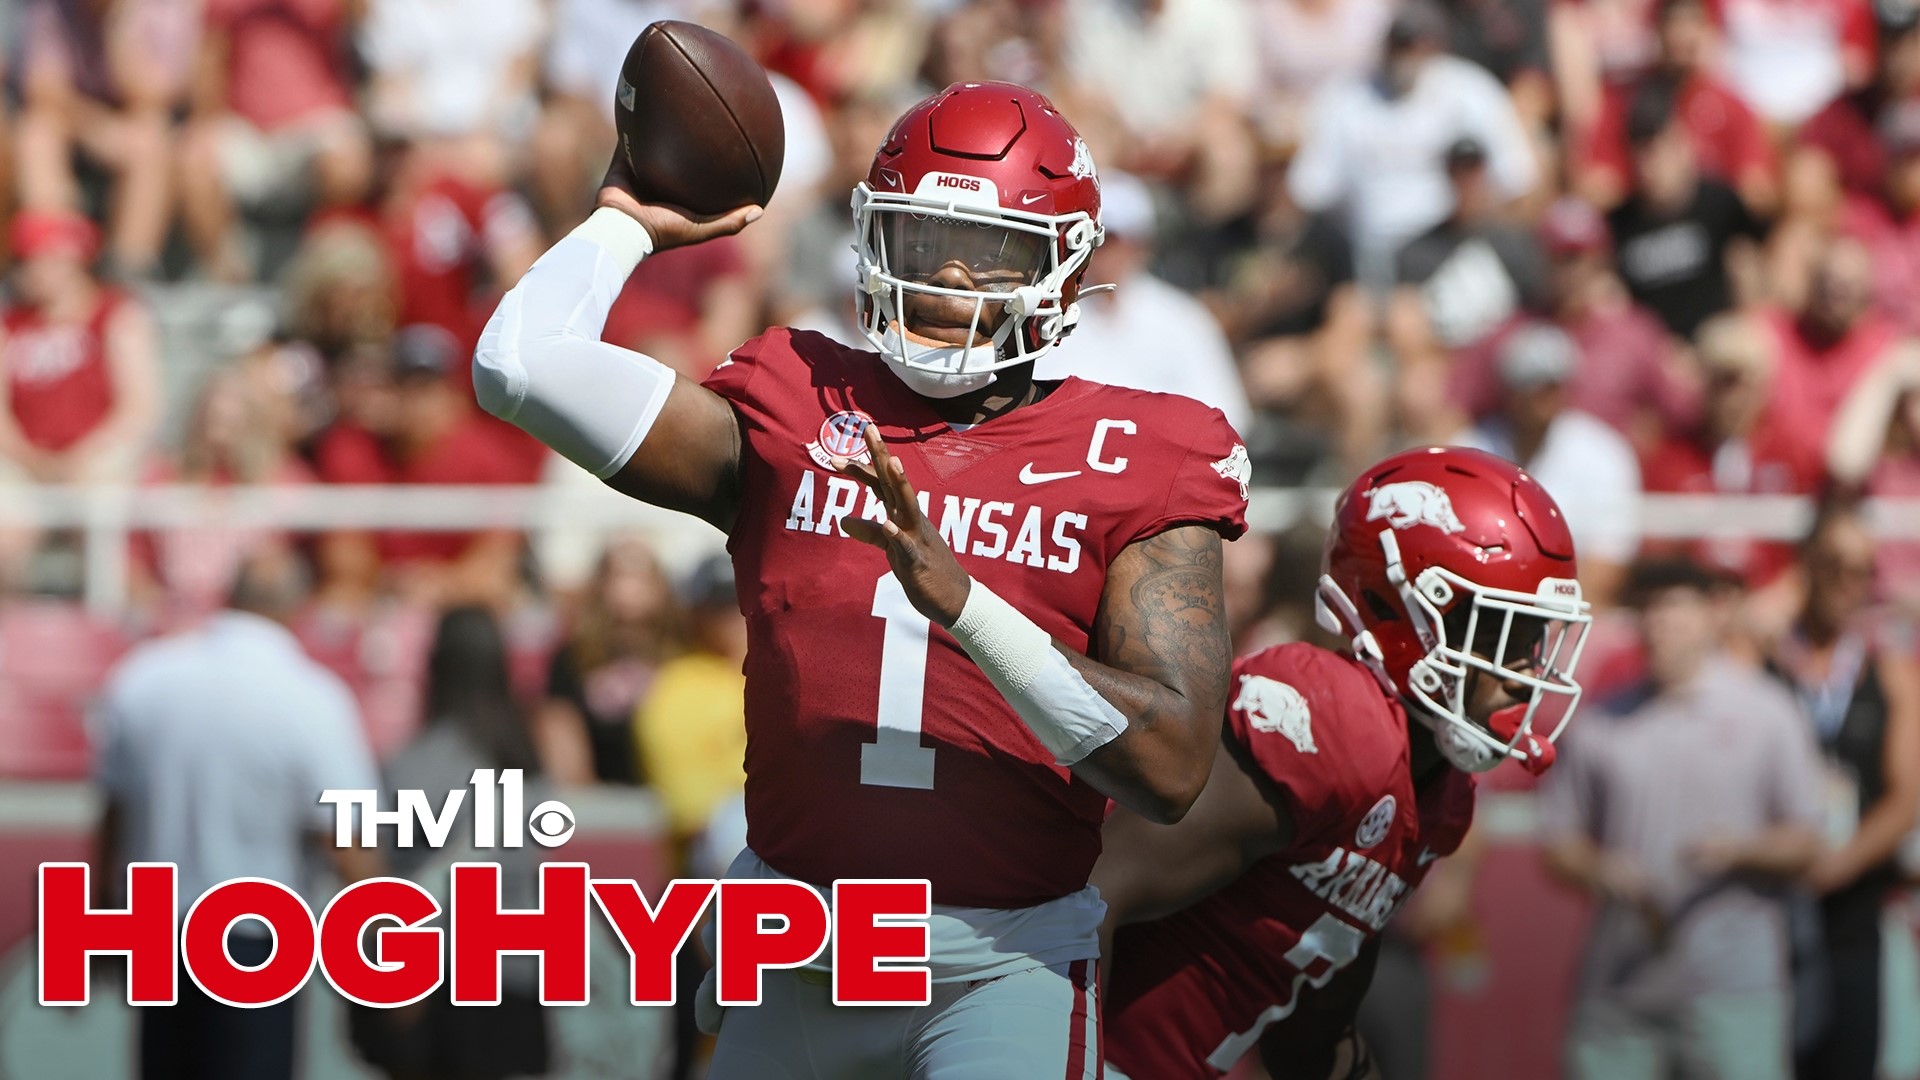 Cierra Clark, John Nabors, and Kevin Luthringer preview Arkansas’s matchup with BYU and what needs to be fixed before SEC play begins on Sept. 23.